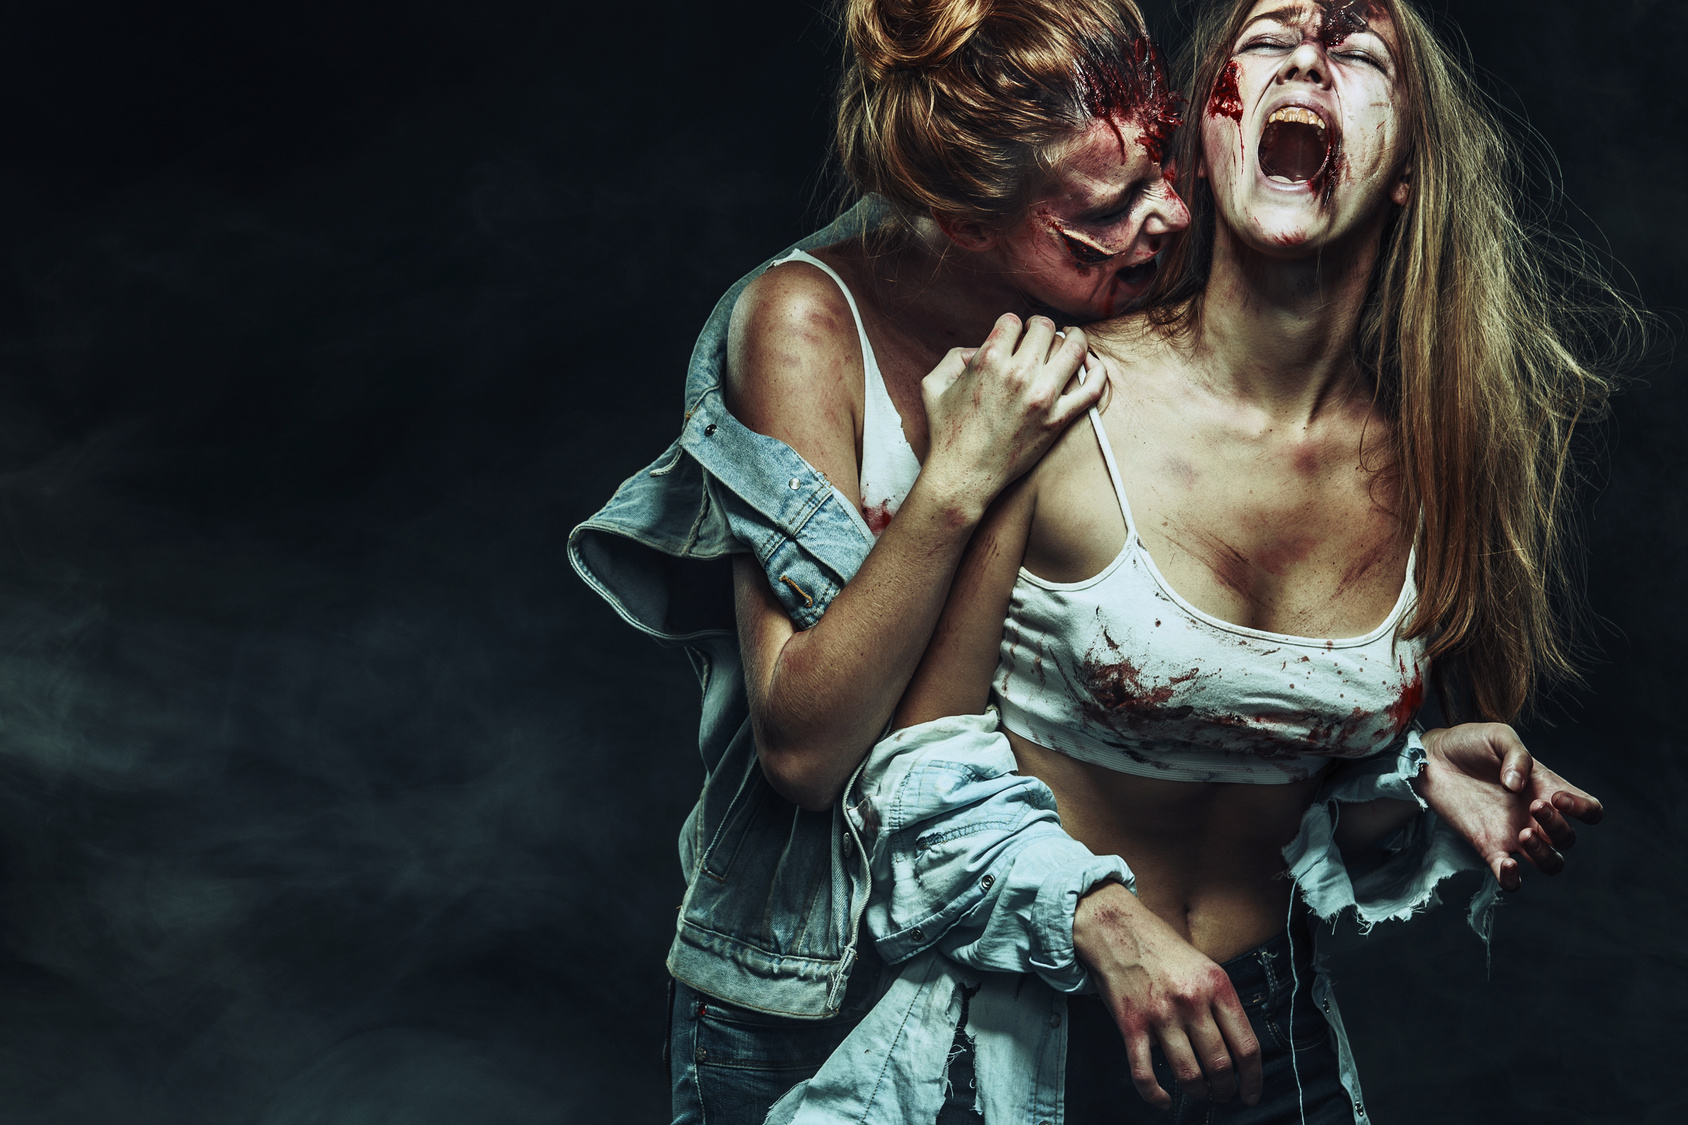 Two Scary zombie women with wounds on Halloween holidays.